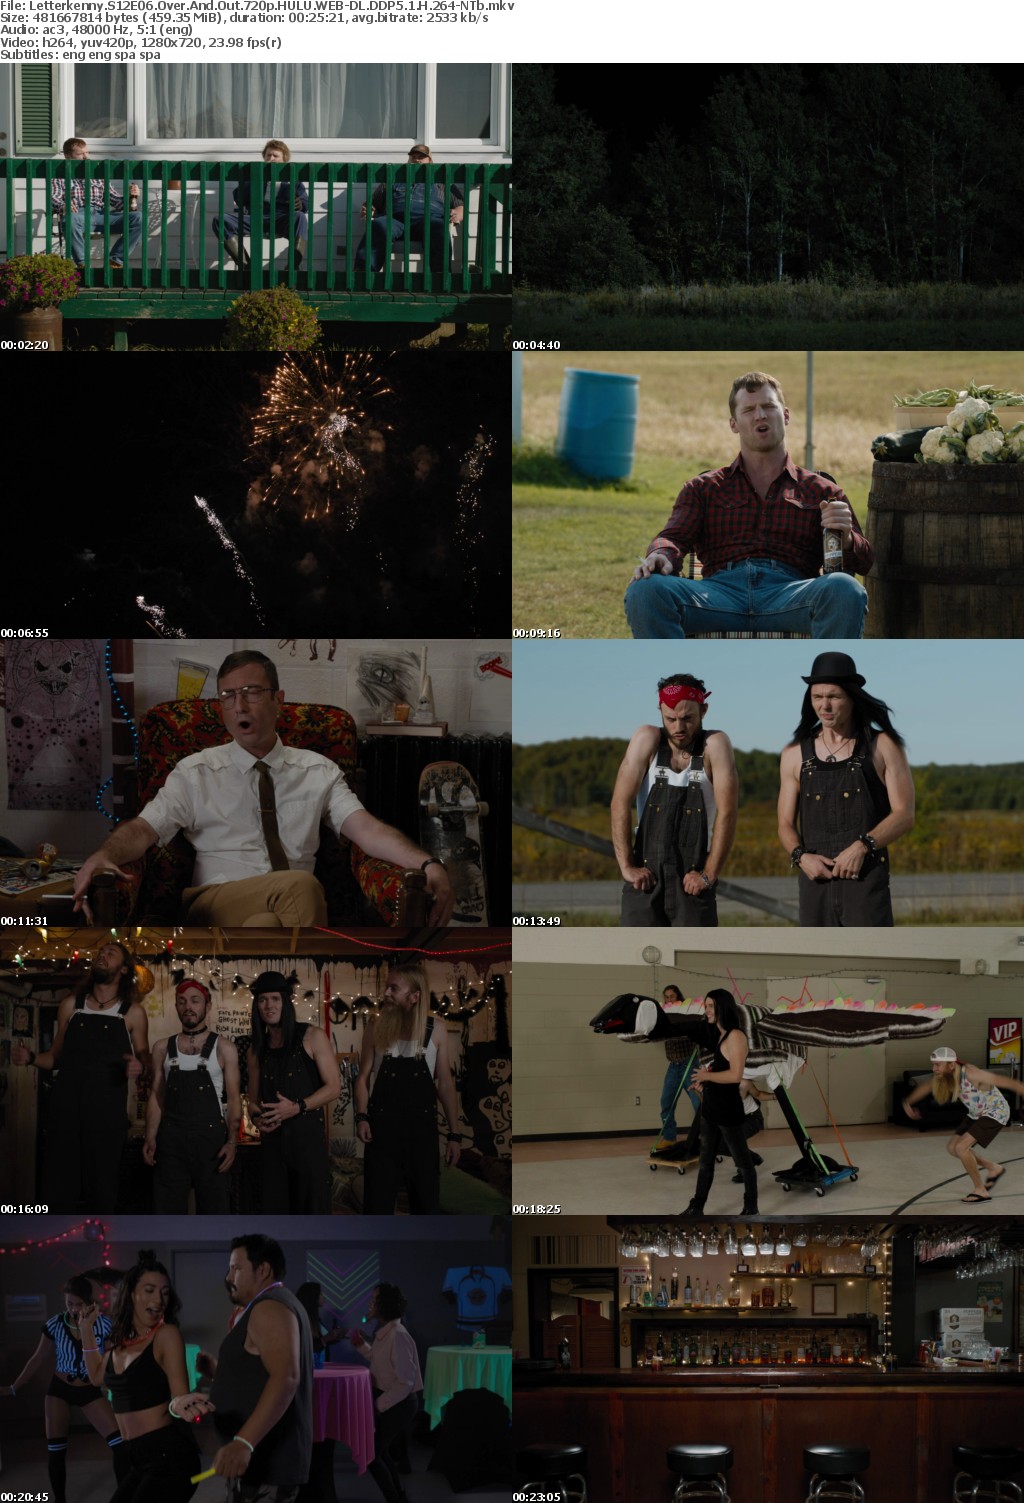 Letterkenny S12E06 Over And Out 720p HULU WEB-DL DDP5 1 H 264-NTb